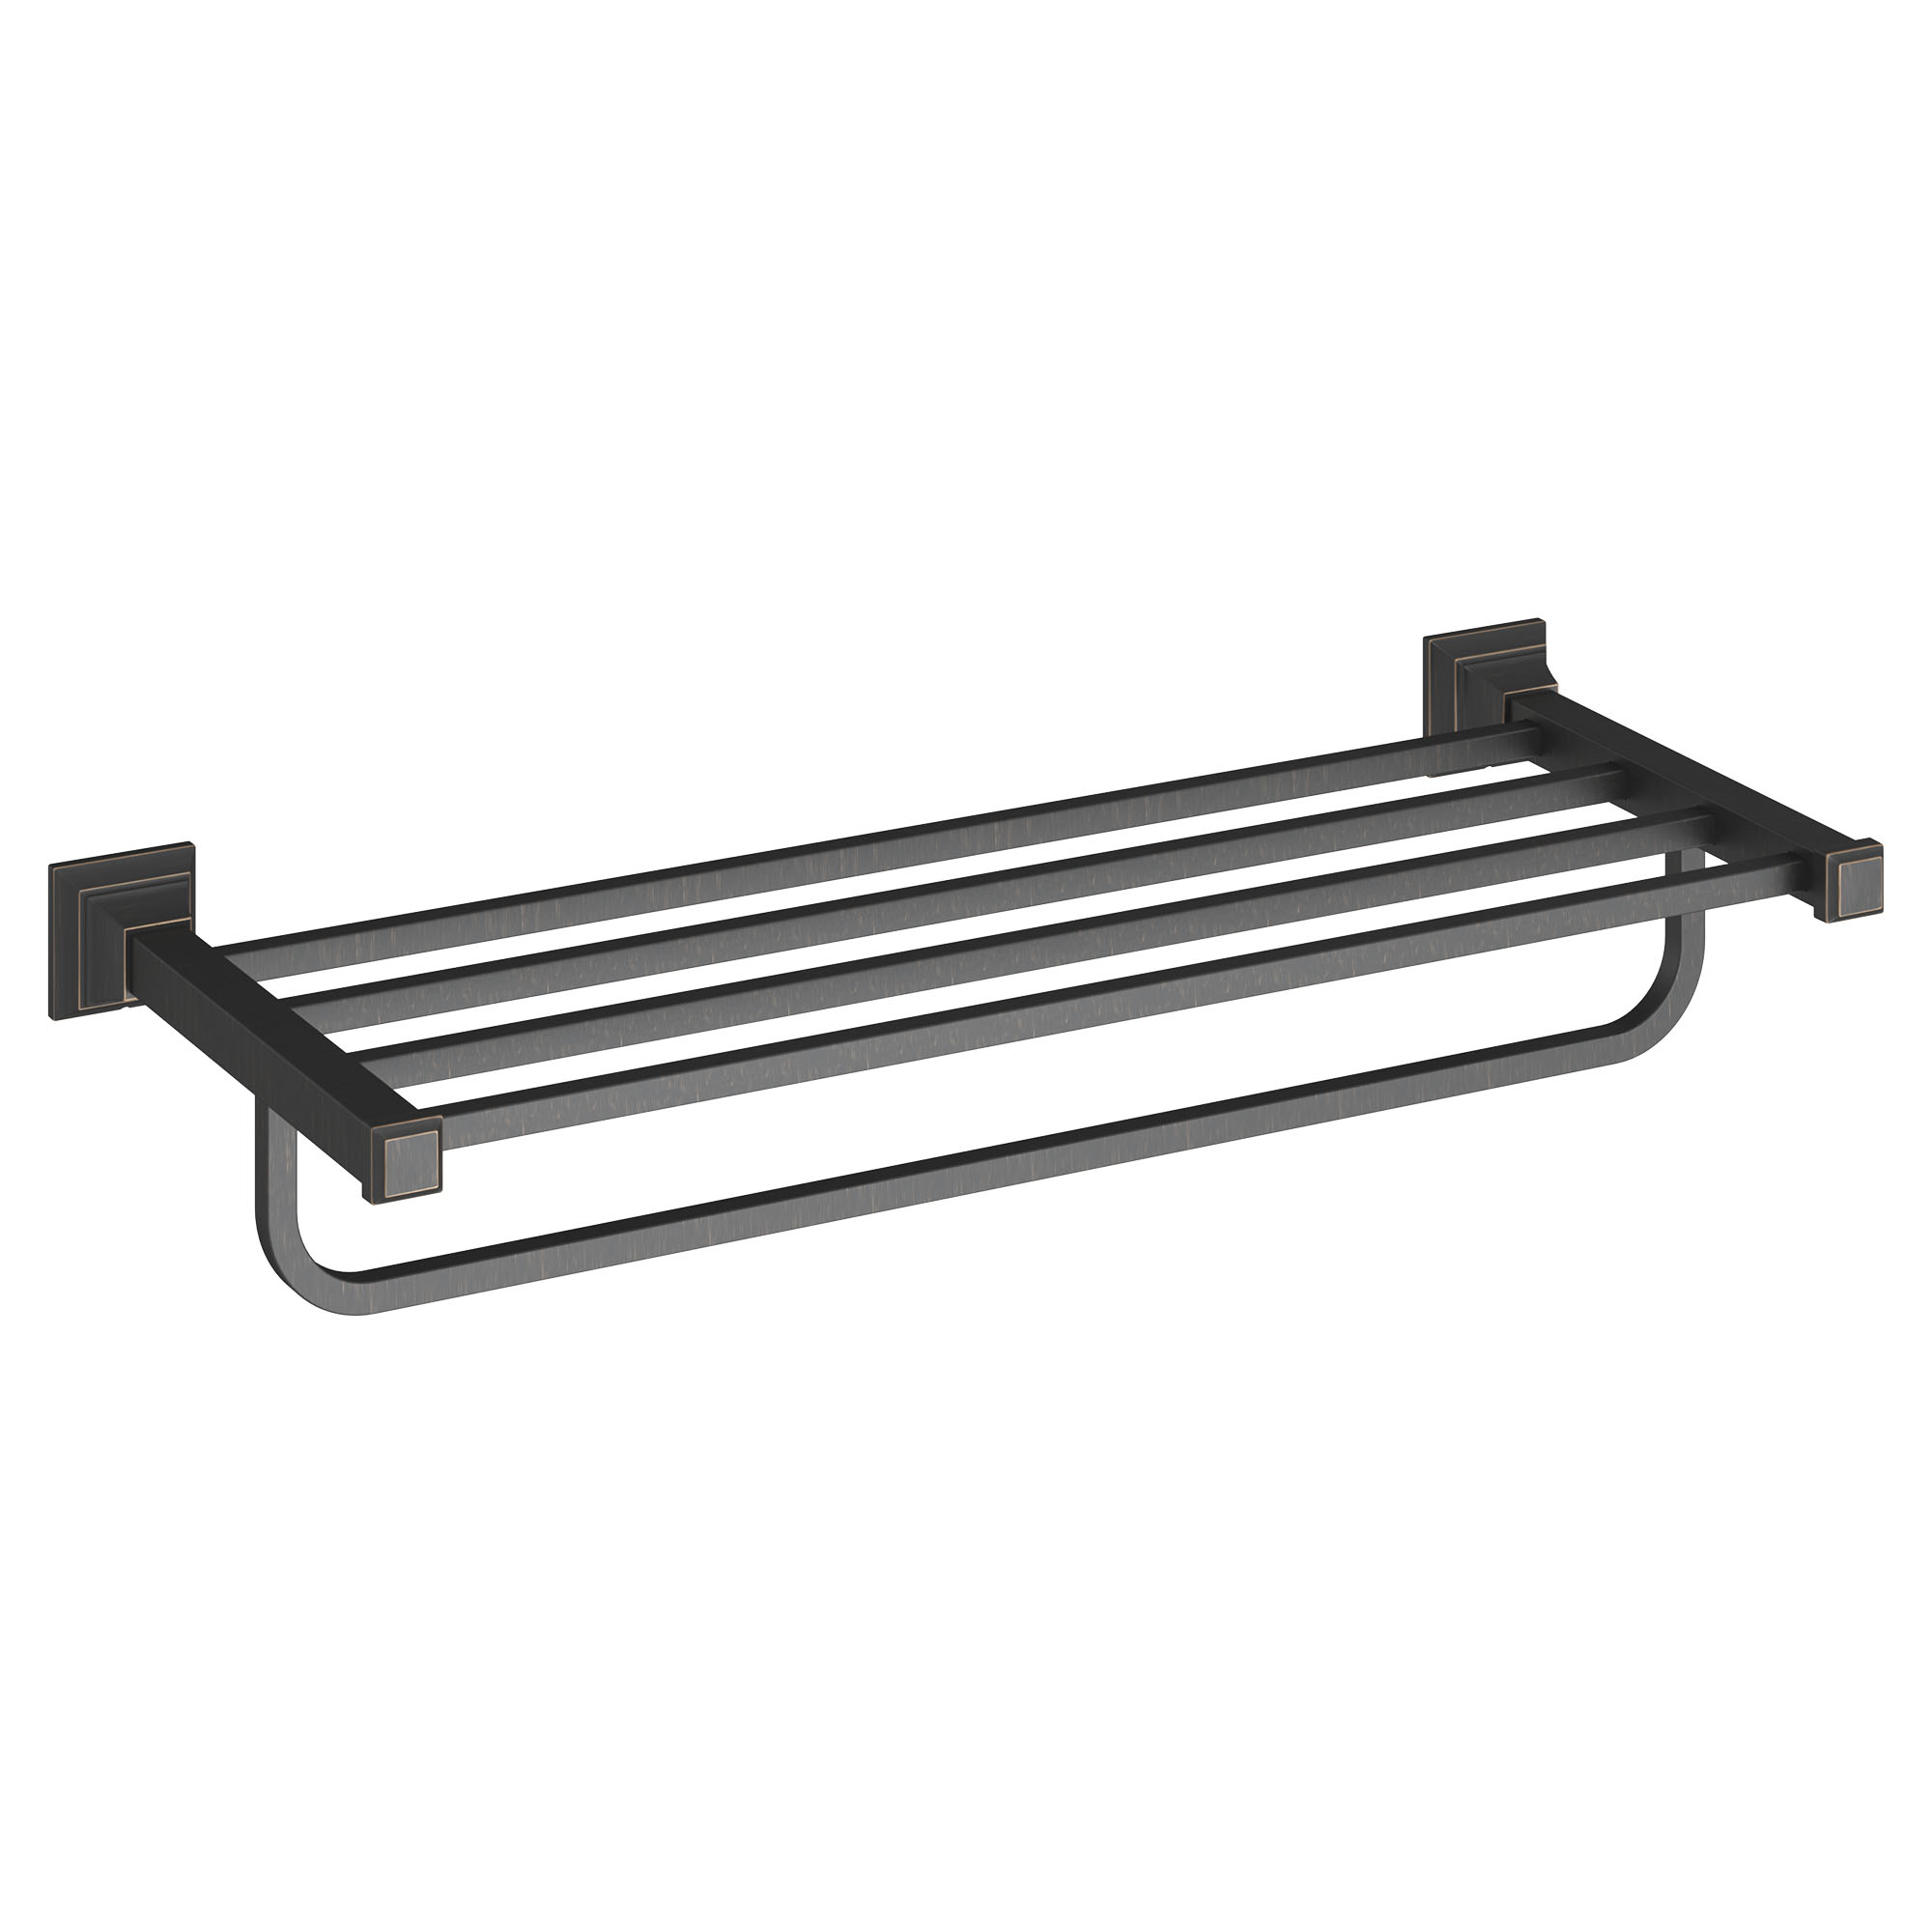 Town Square™ S 24-Inch Train Rack